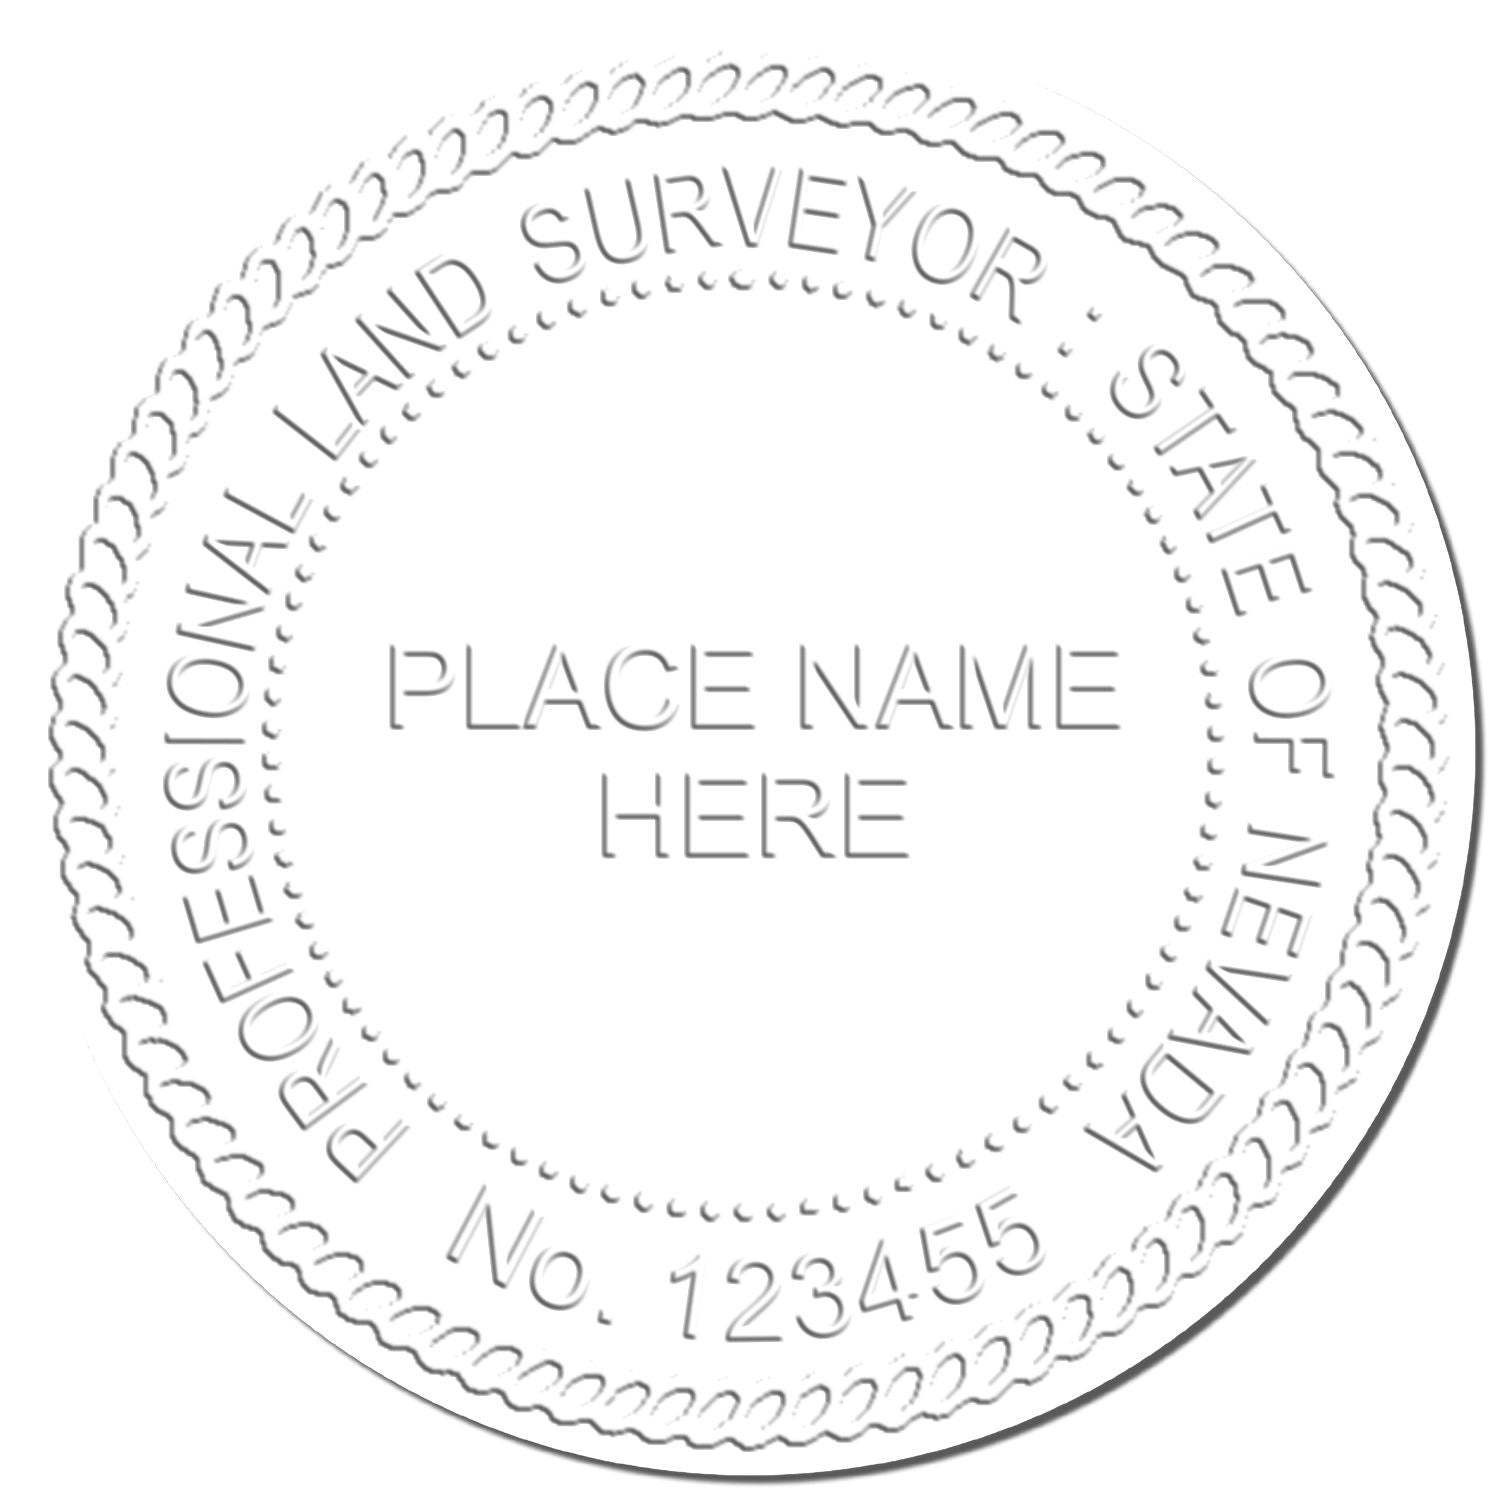 The main image for the Long Reach Nevada Land Surveyor Seal depicting a sample of the imprint and electronic files